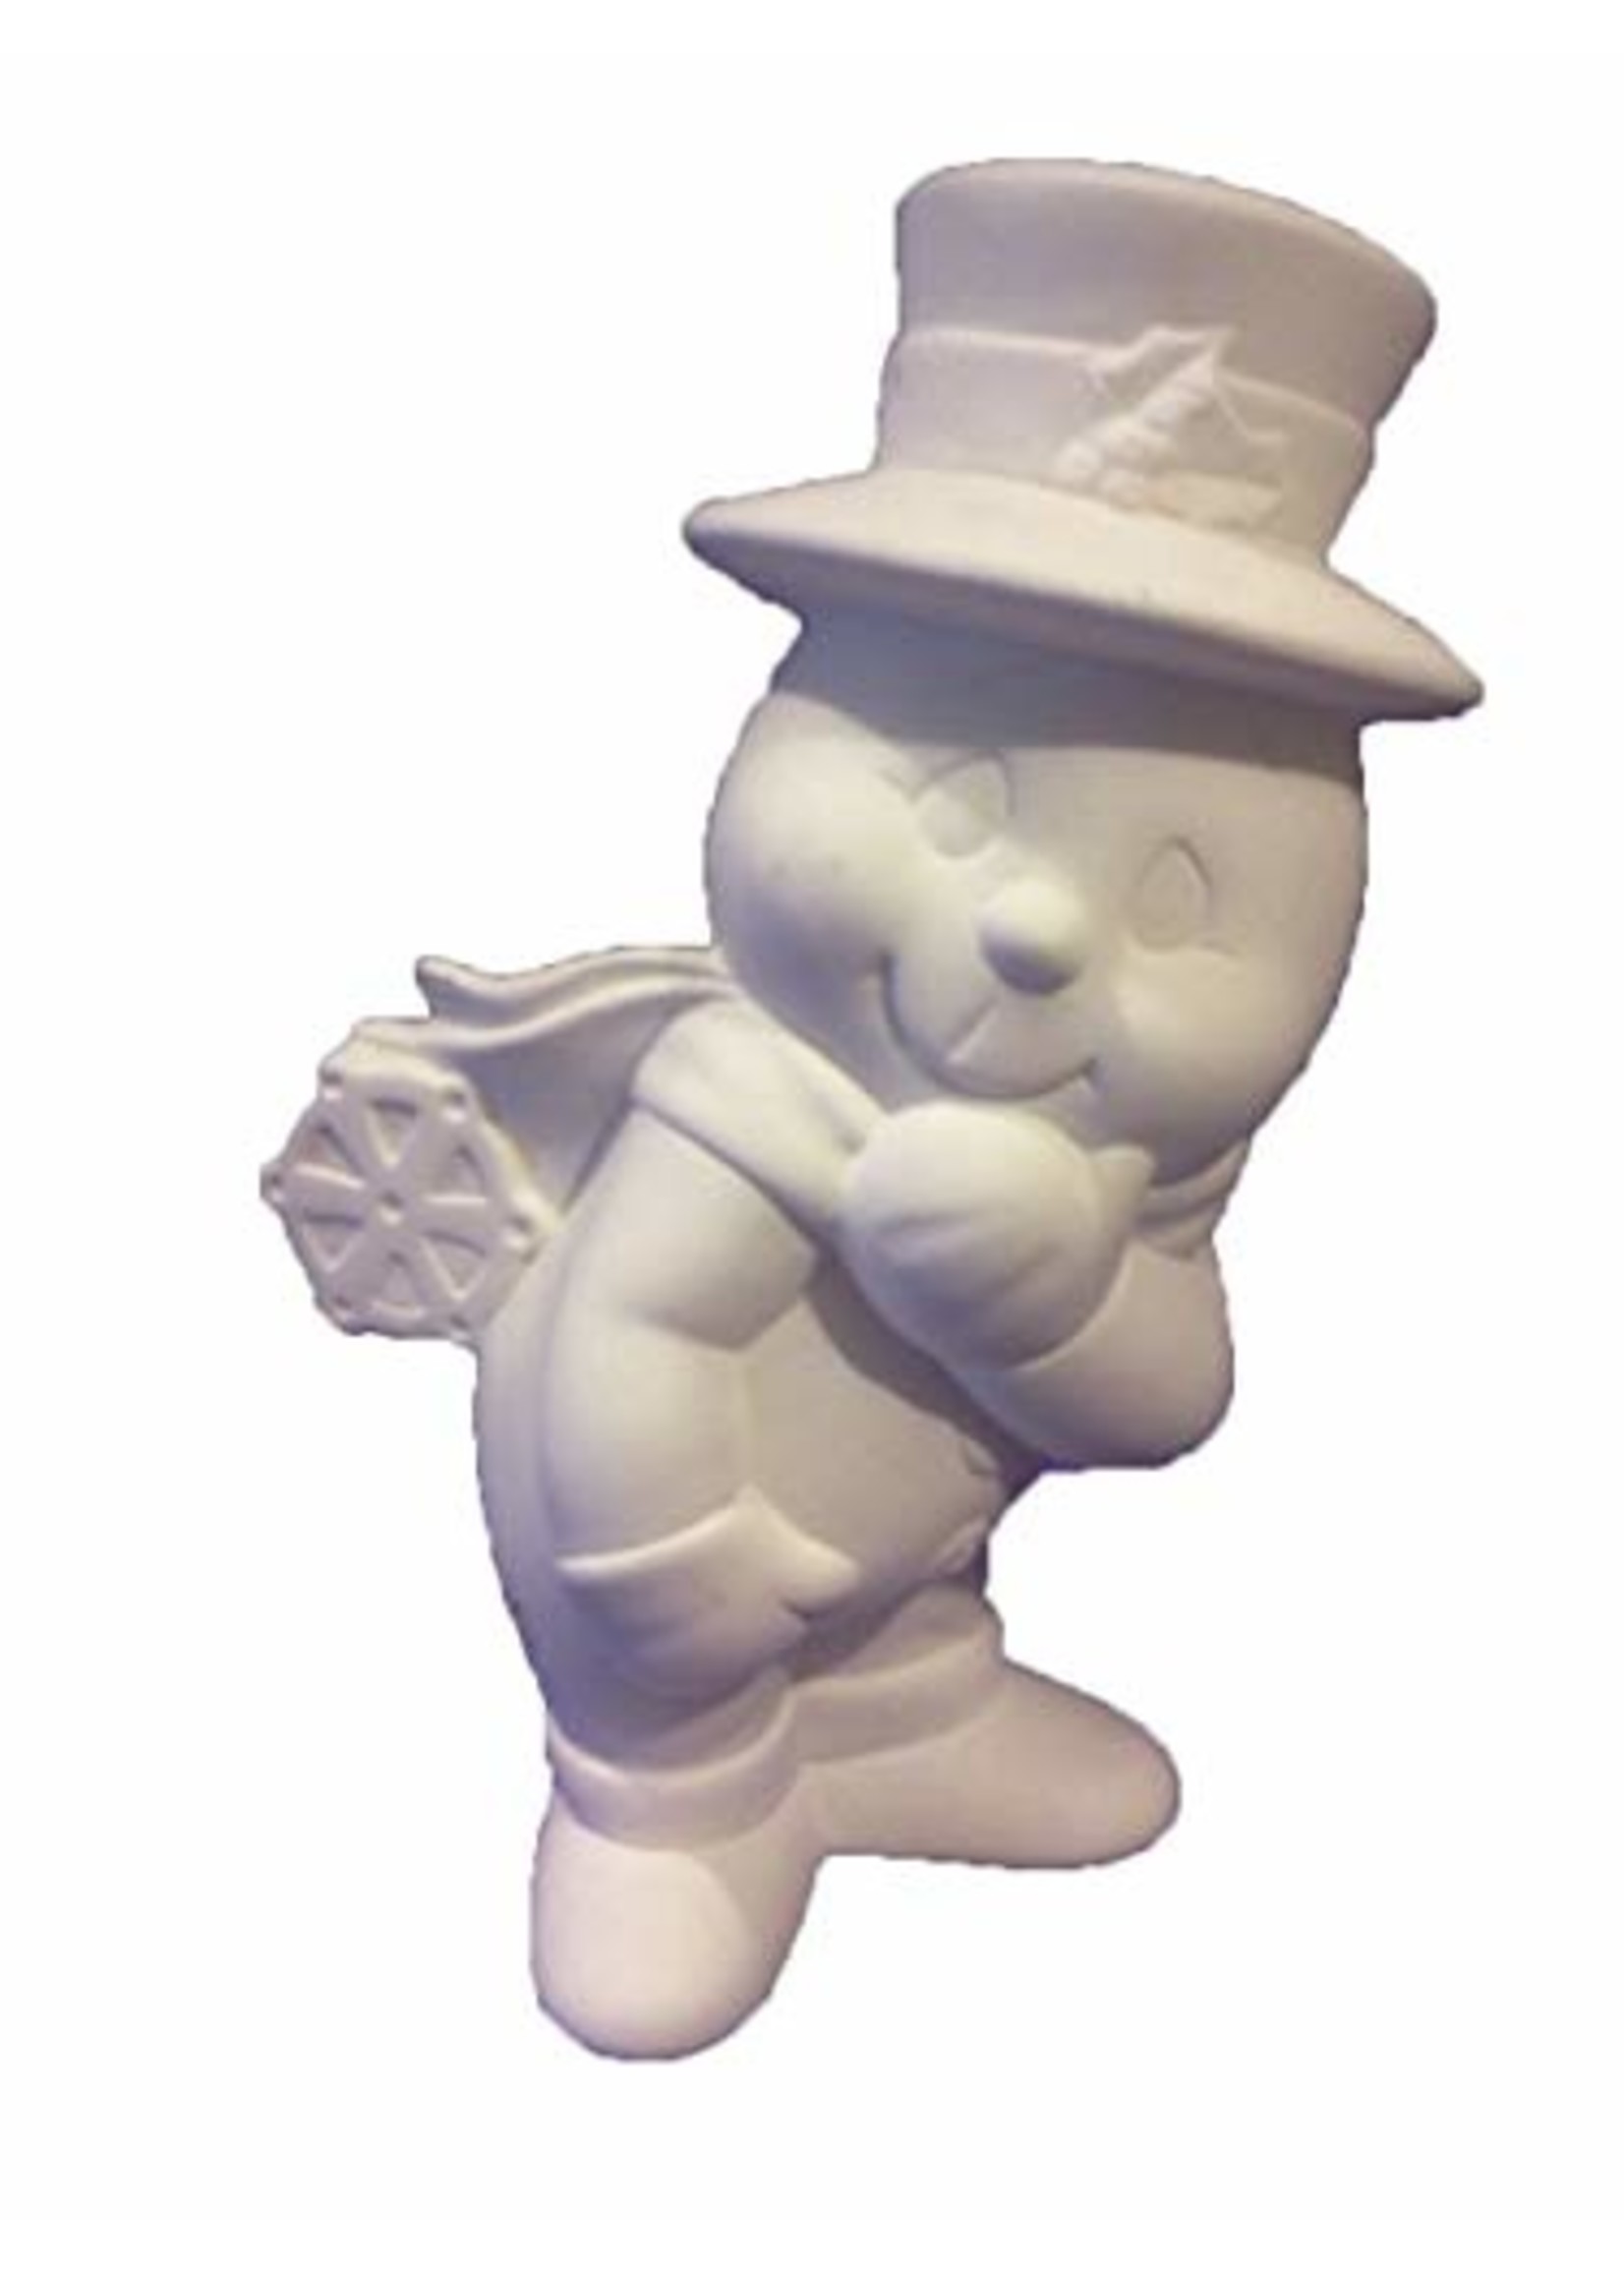 Creative Kreations Ceramics Snowman Snowflake on Foot 7 Ceramic Bisque Ready to Paint 